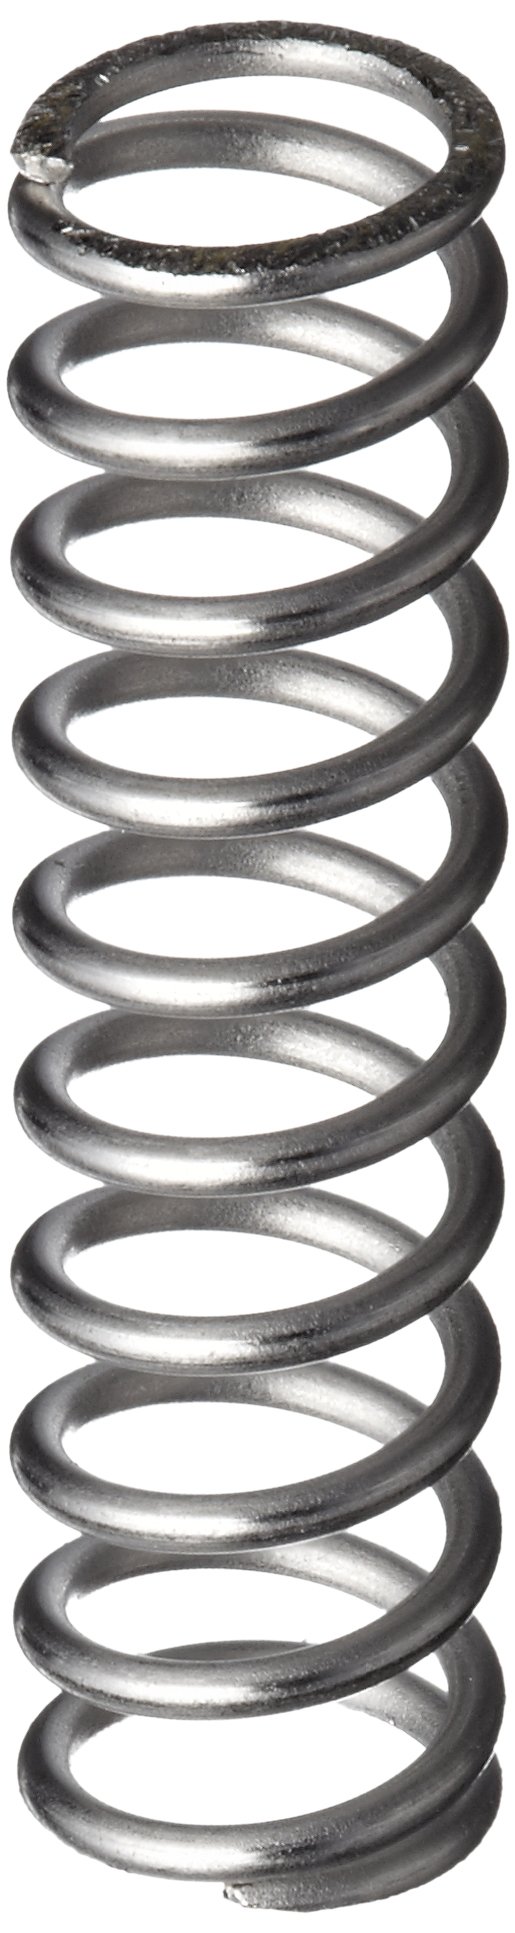 Free Metal Spring Cliparts, Download Free Clip Art, Free Clip Art on.